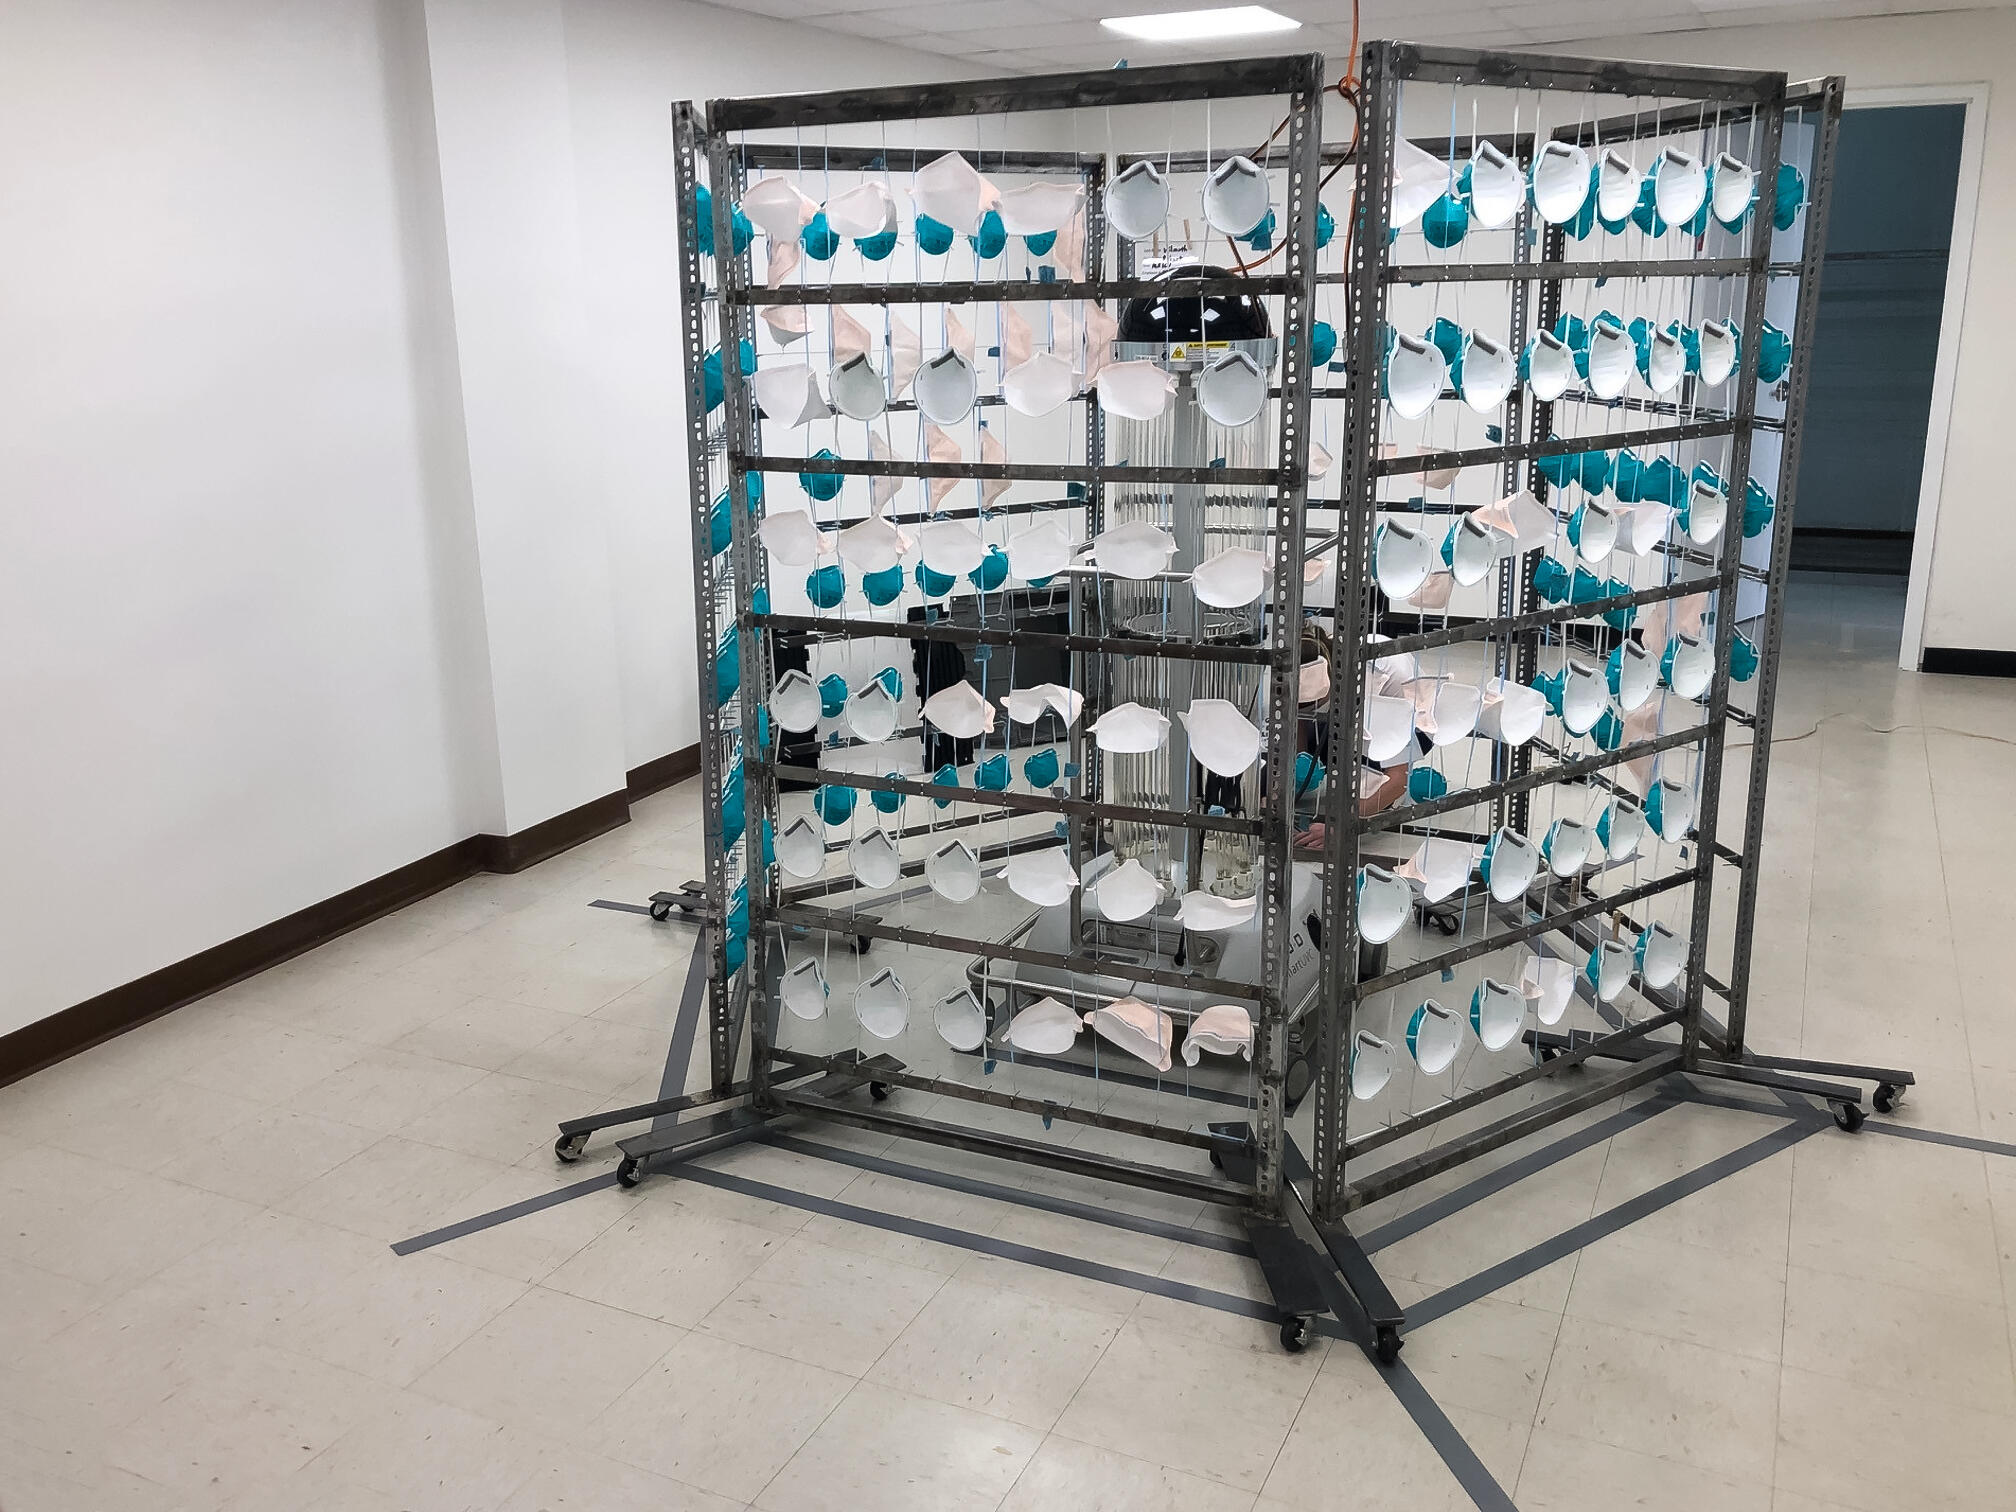 A rack of N95 masks in the process of decontamination.